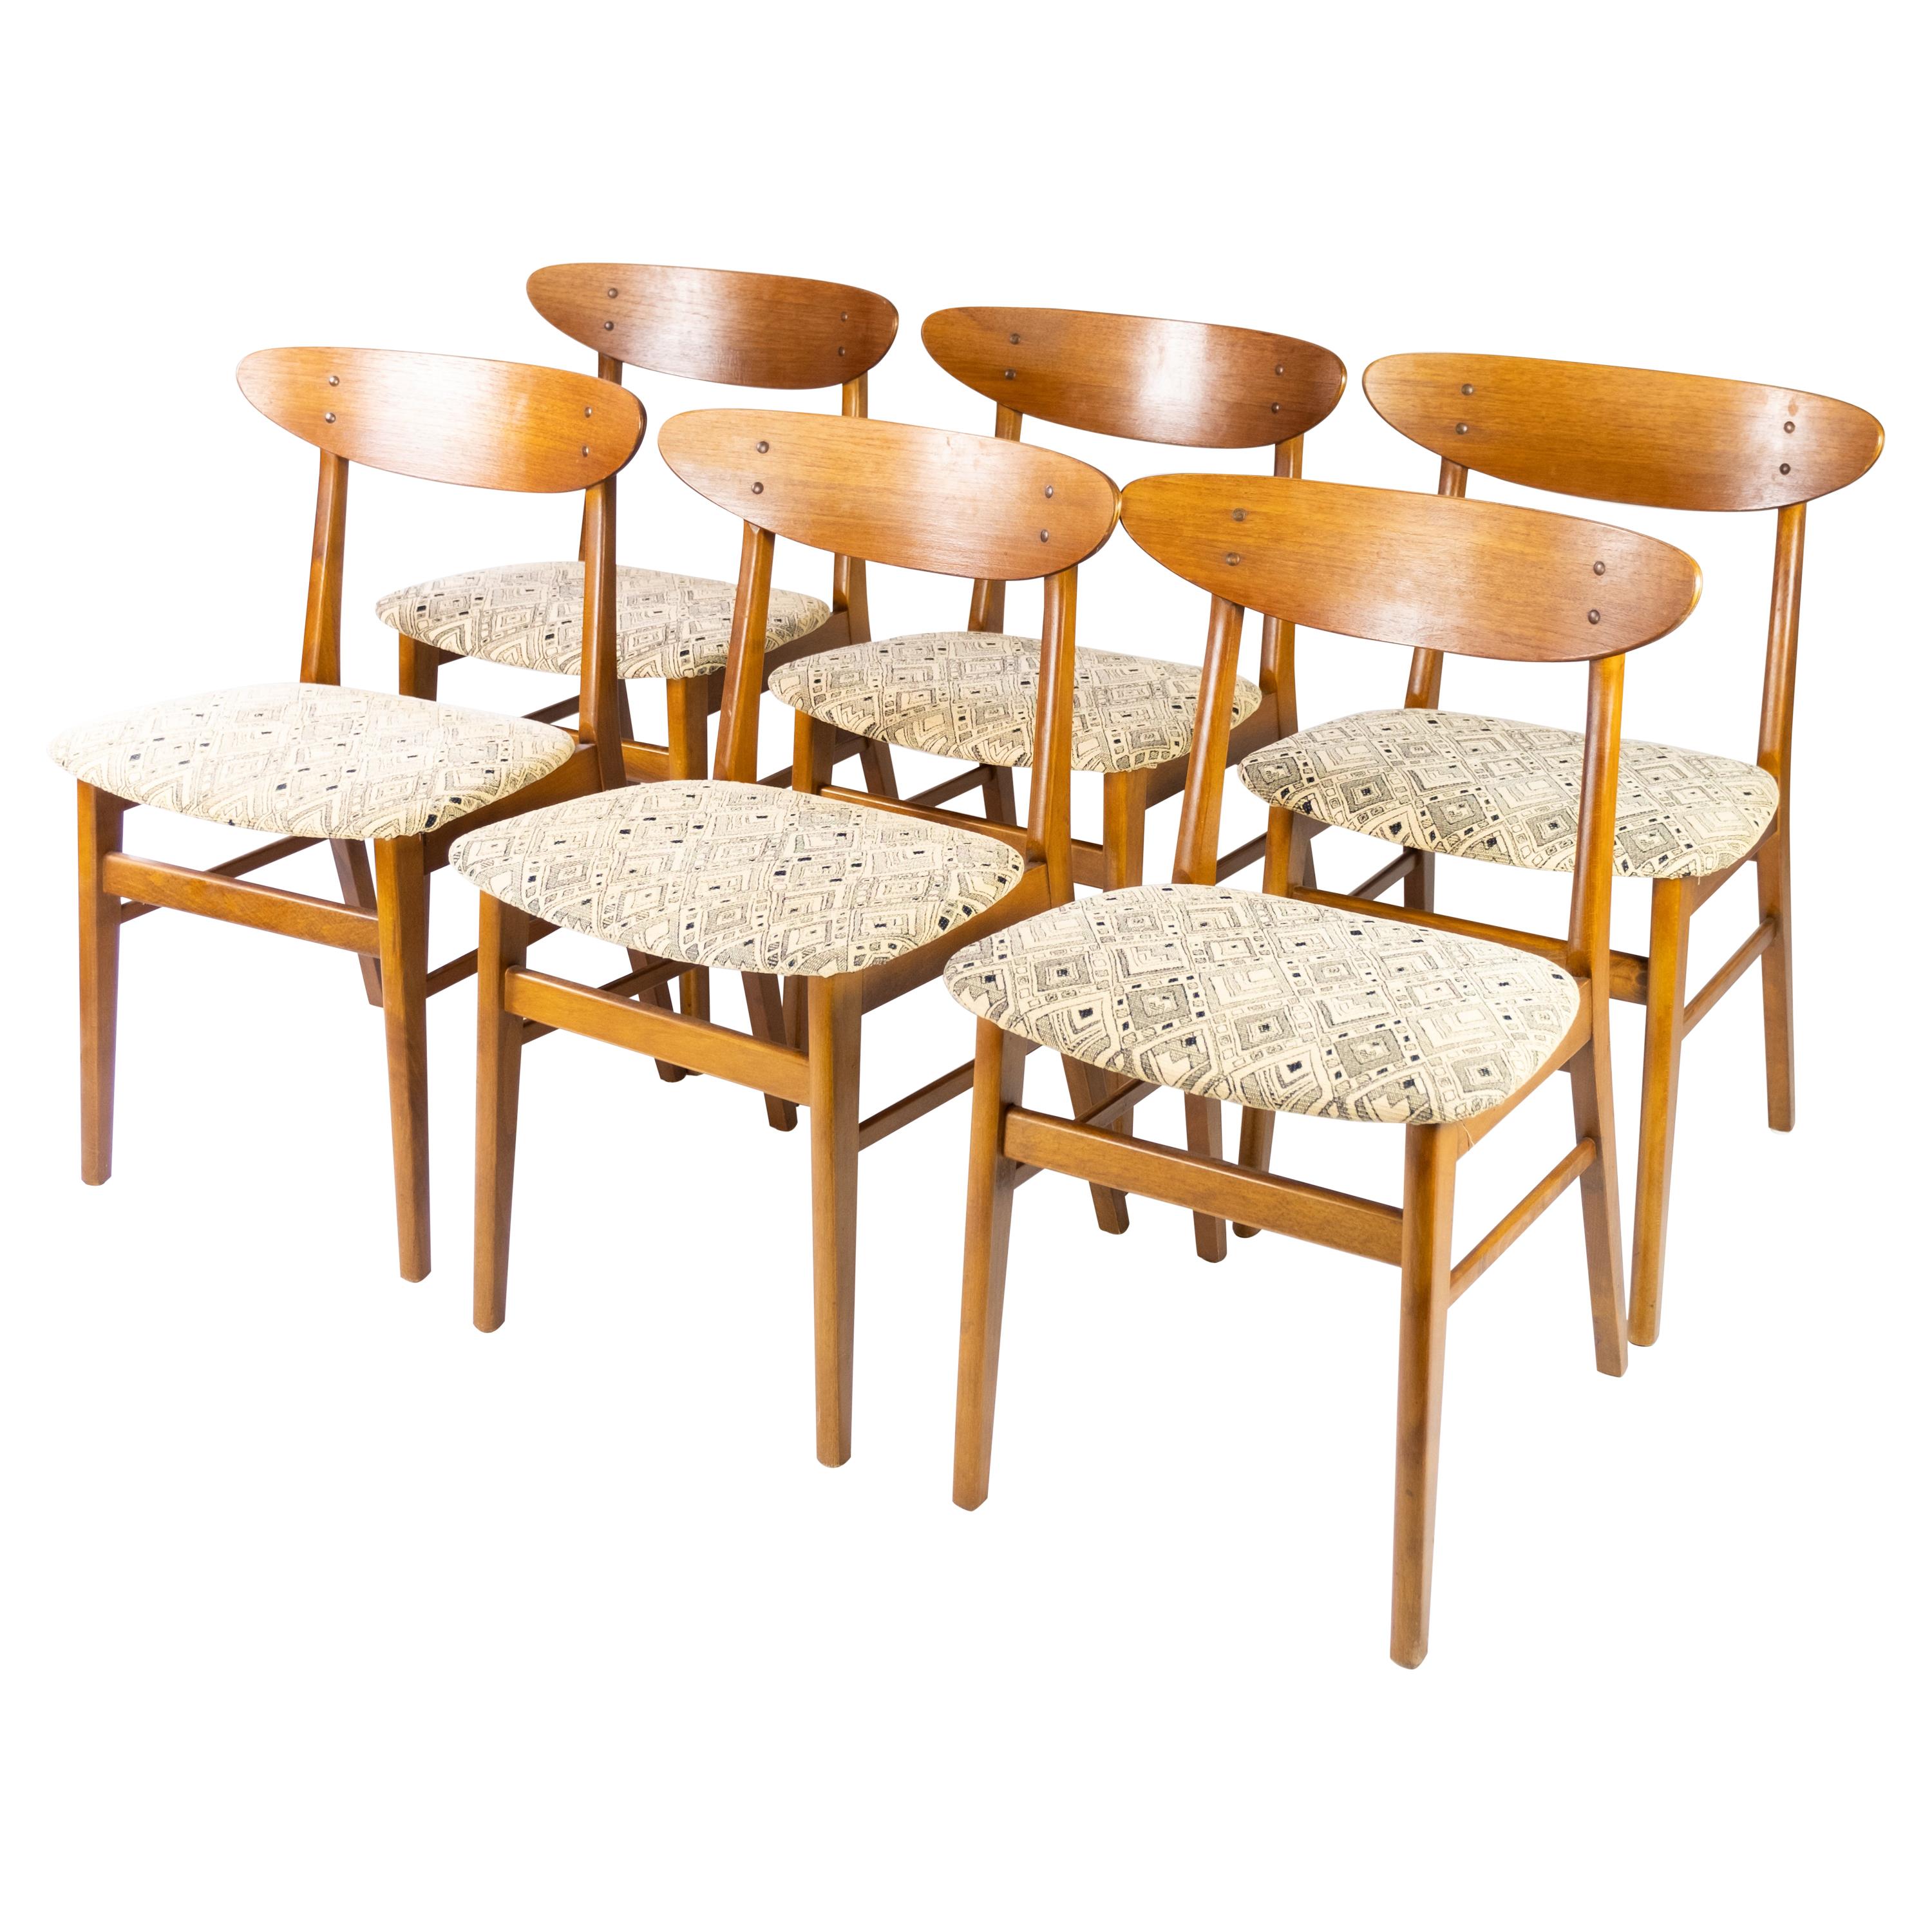 Scandinavian Modern Set of Six Dining Room Chairs in Teak from the 1960s For Sale